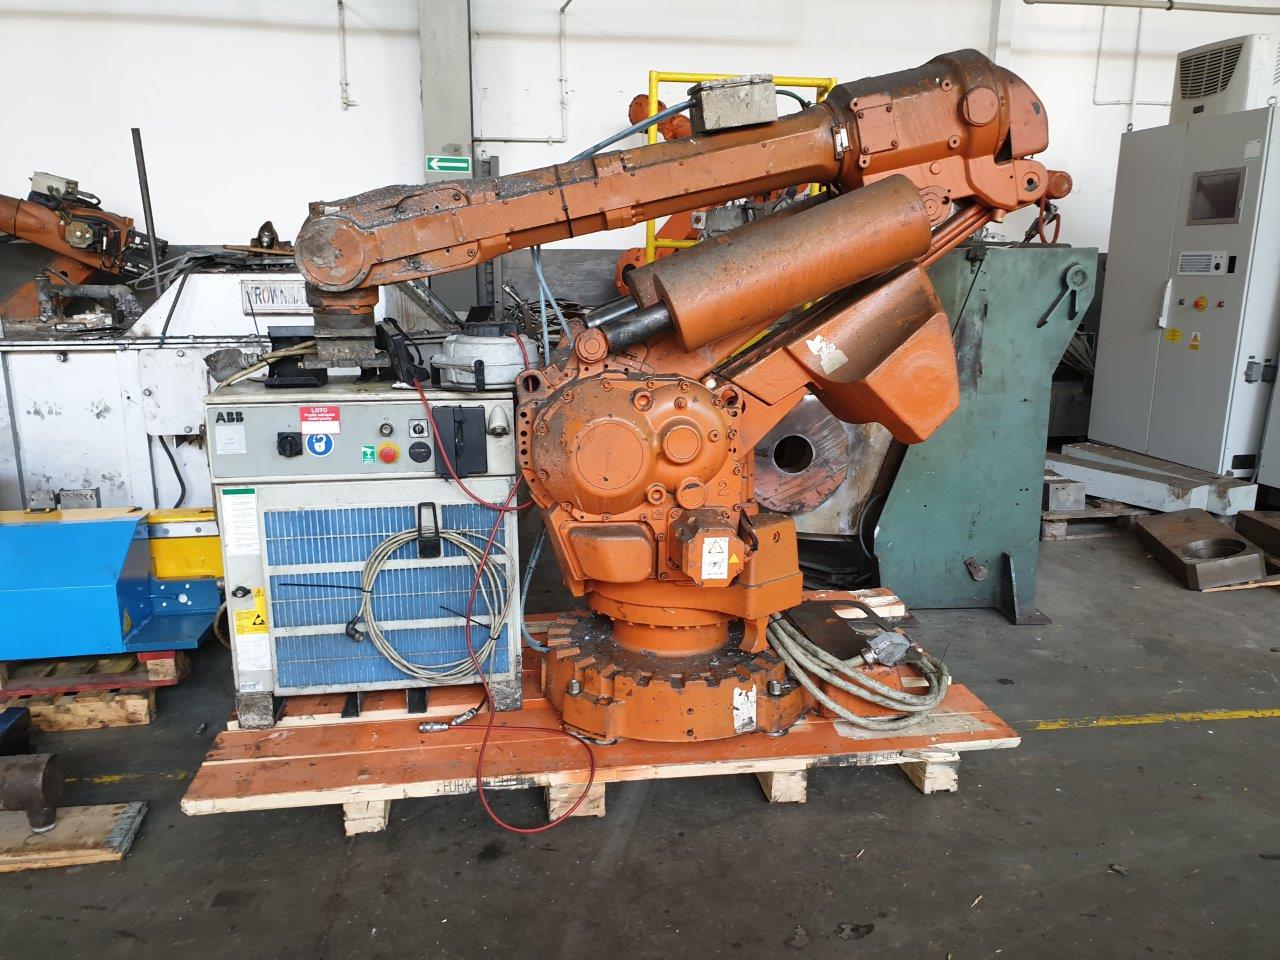 ABB IRB 6600 foundry robot HR1827, used